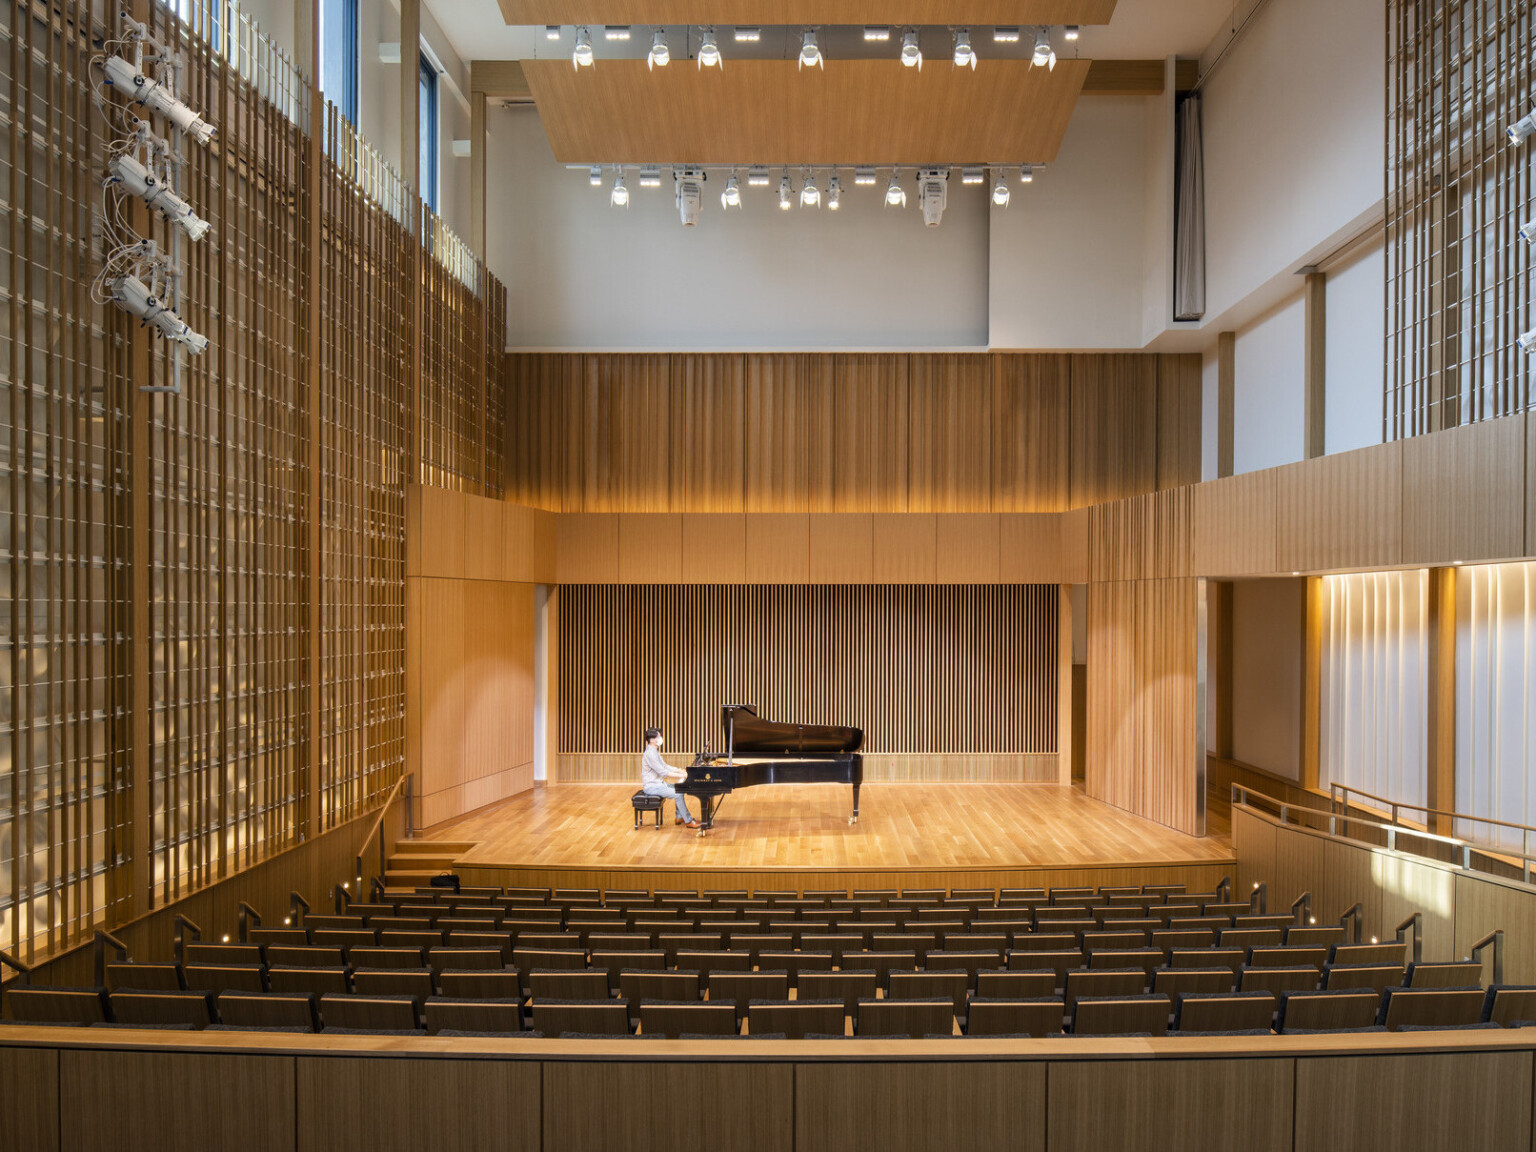 Man sitting at piano in double height recital room auditorium with theater seating. Wood panel designs on walls and wood acoustic panel